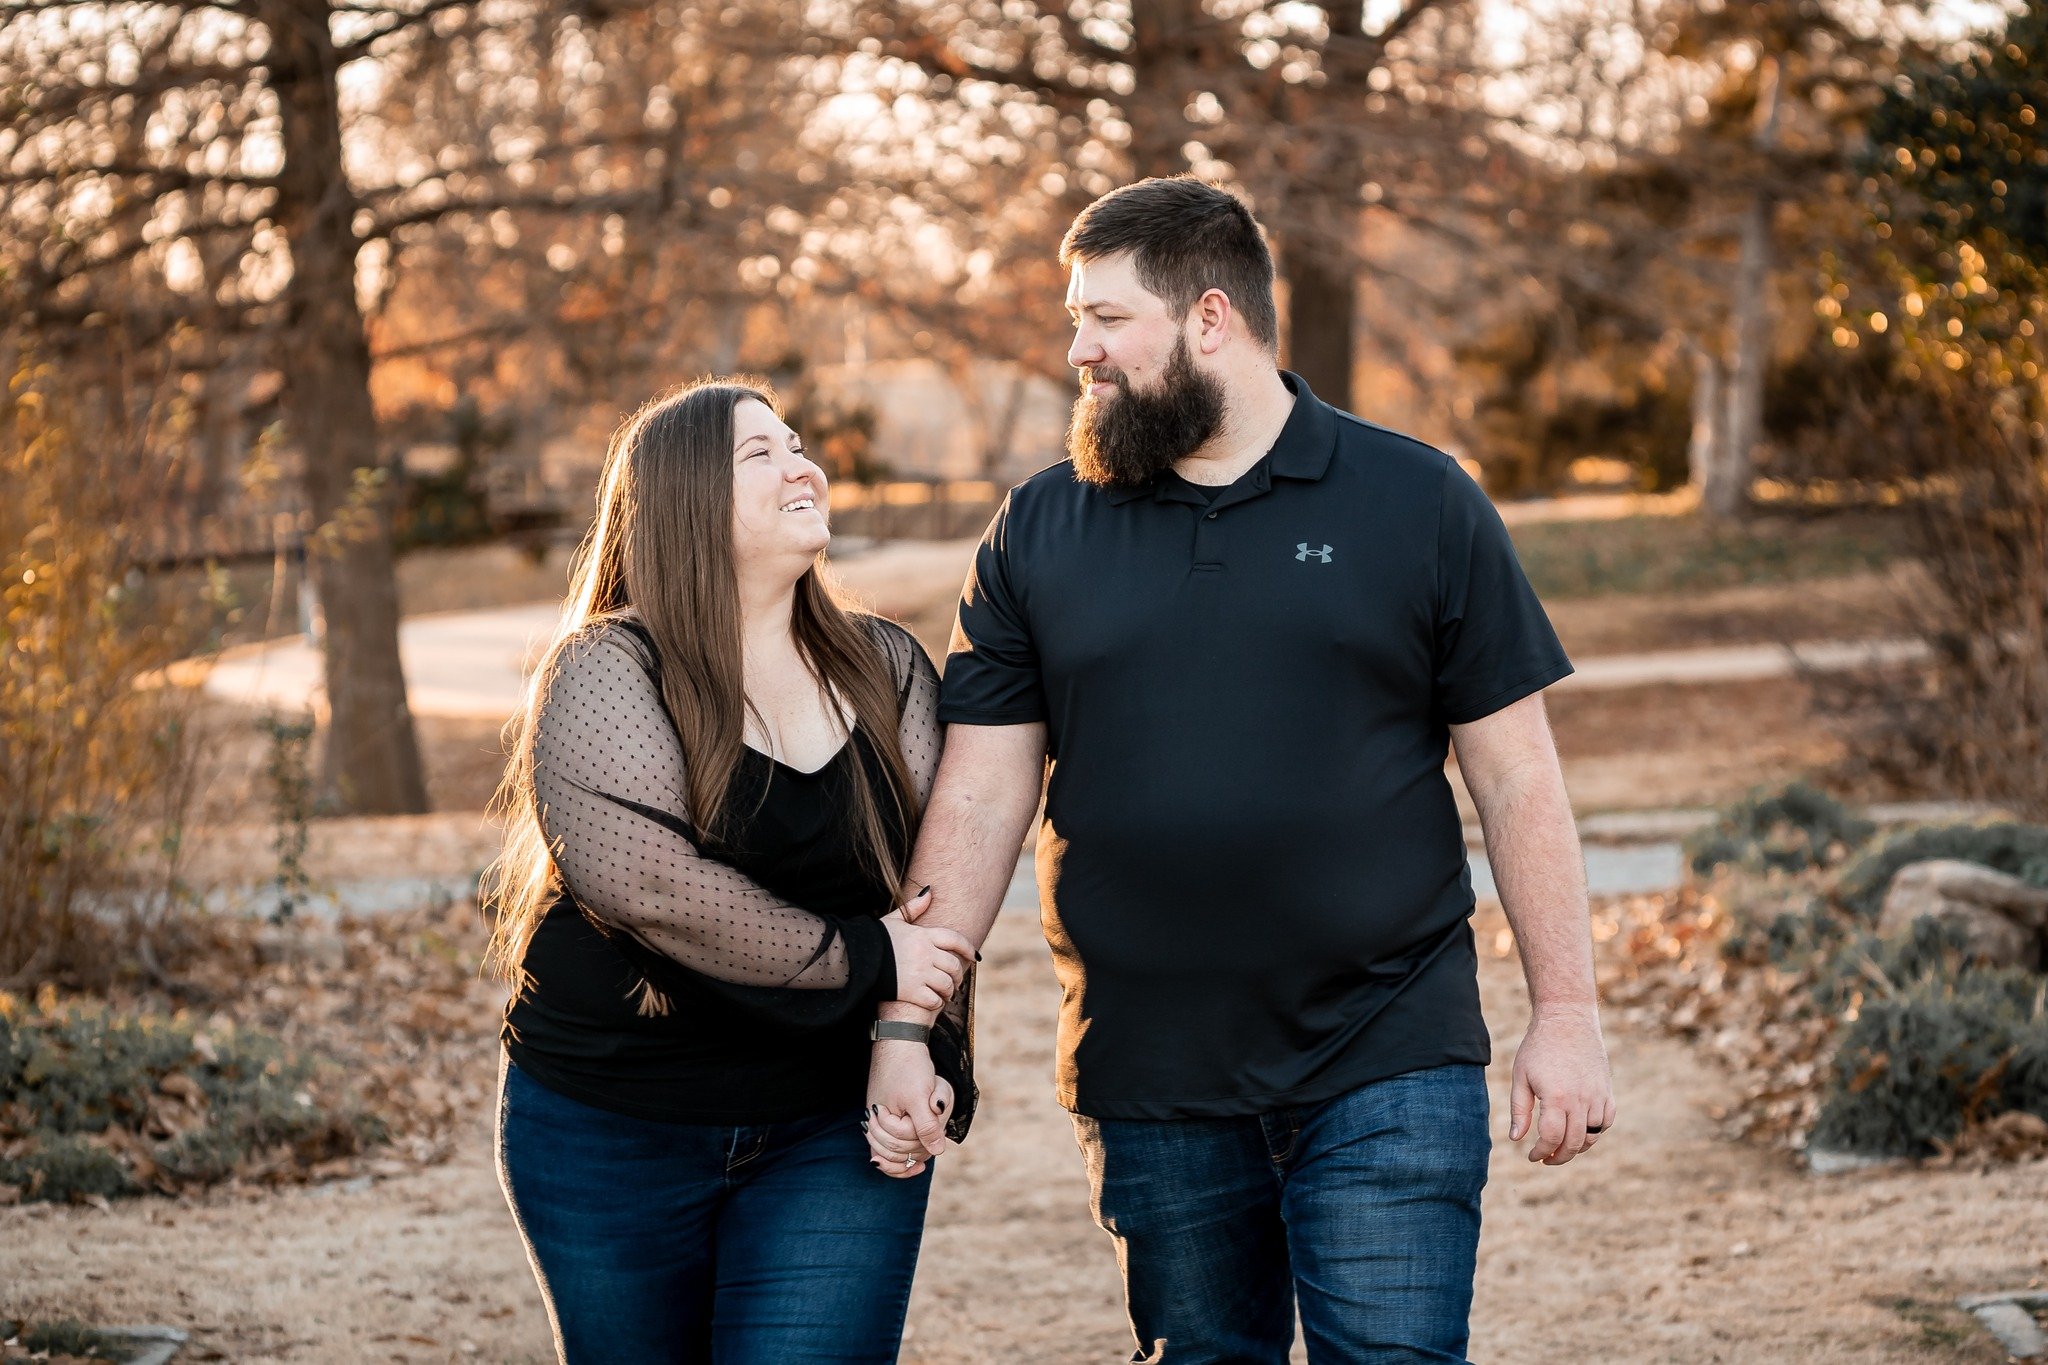 So excited for Jacob &amp; kennedy's big day today 🥰
.
.
.
.
Will Rogers Gardens 
#engagement #photographer #engagementphotographer #okc #okcphotographer #okcphotography #oklahomacity #firstsandlasts #engagedlife #couplesgoals #shesaidyes #wedoklaho